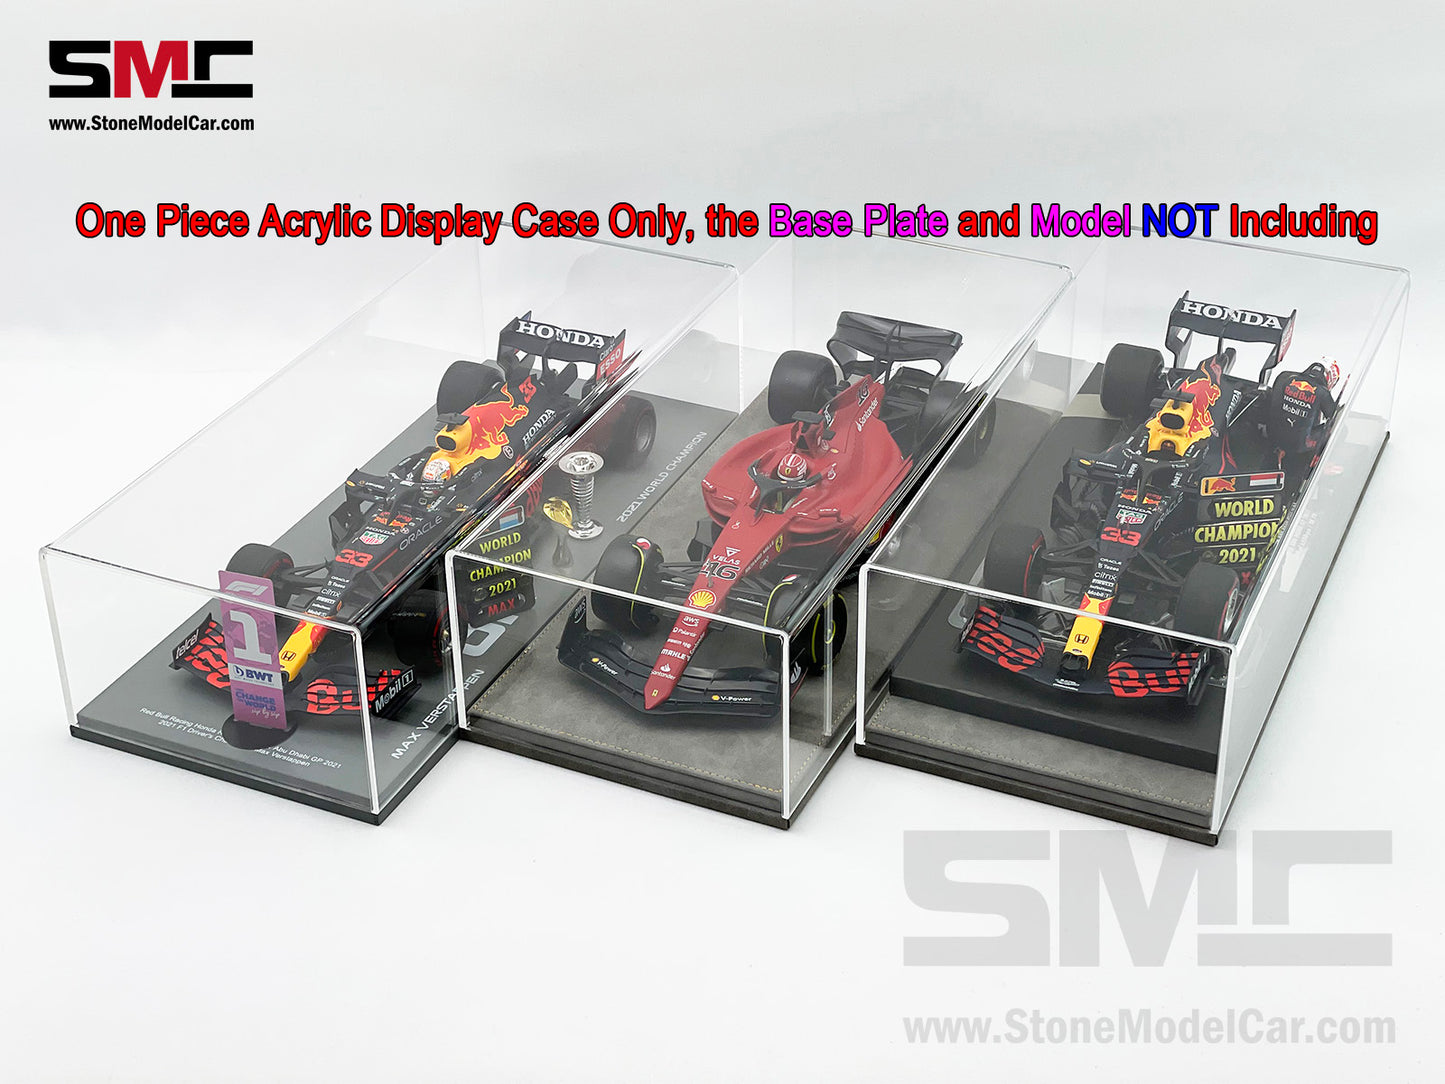 Premium Acrylic Display Cover & Show Case Replacement for 1:18 Spark F1 Car Models